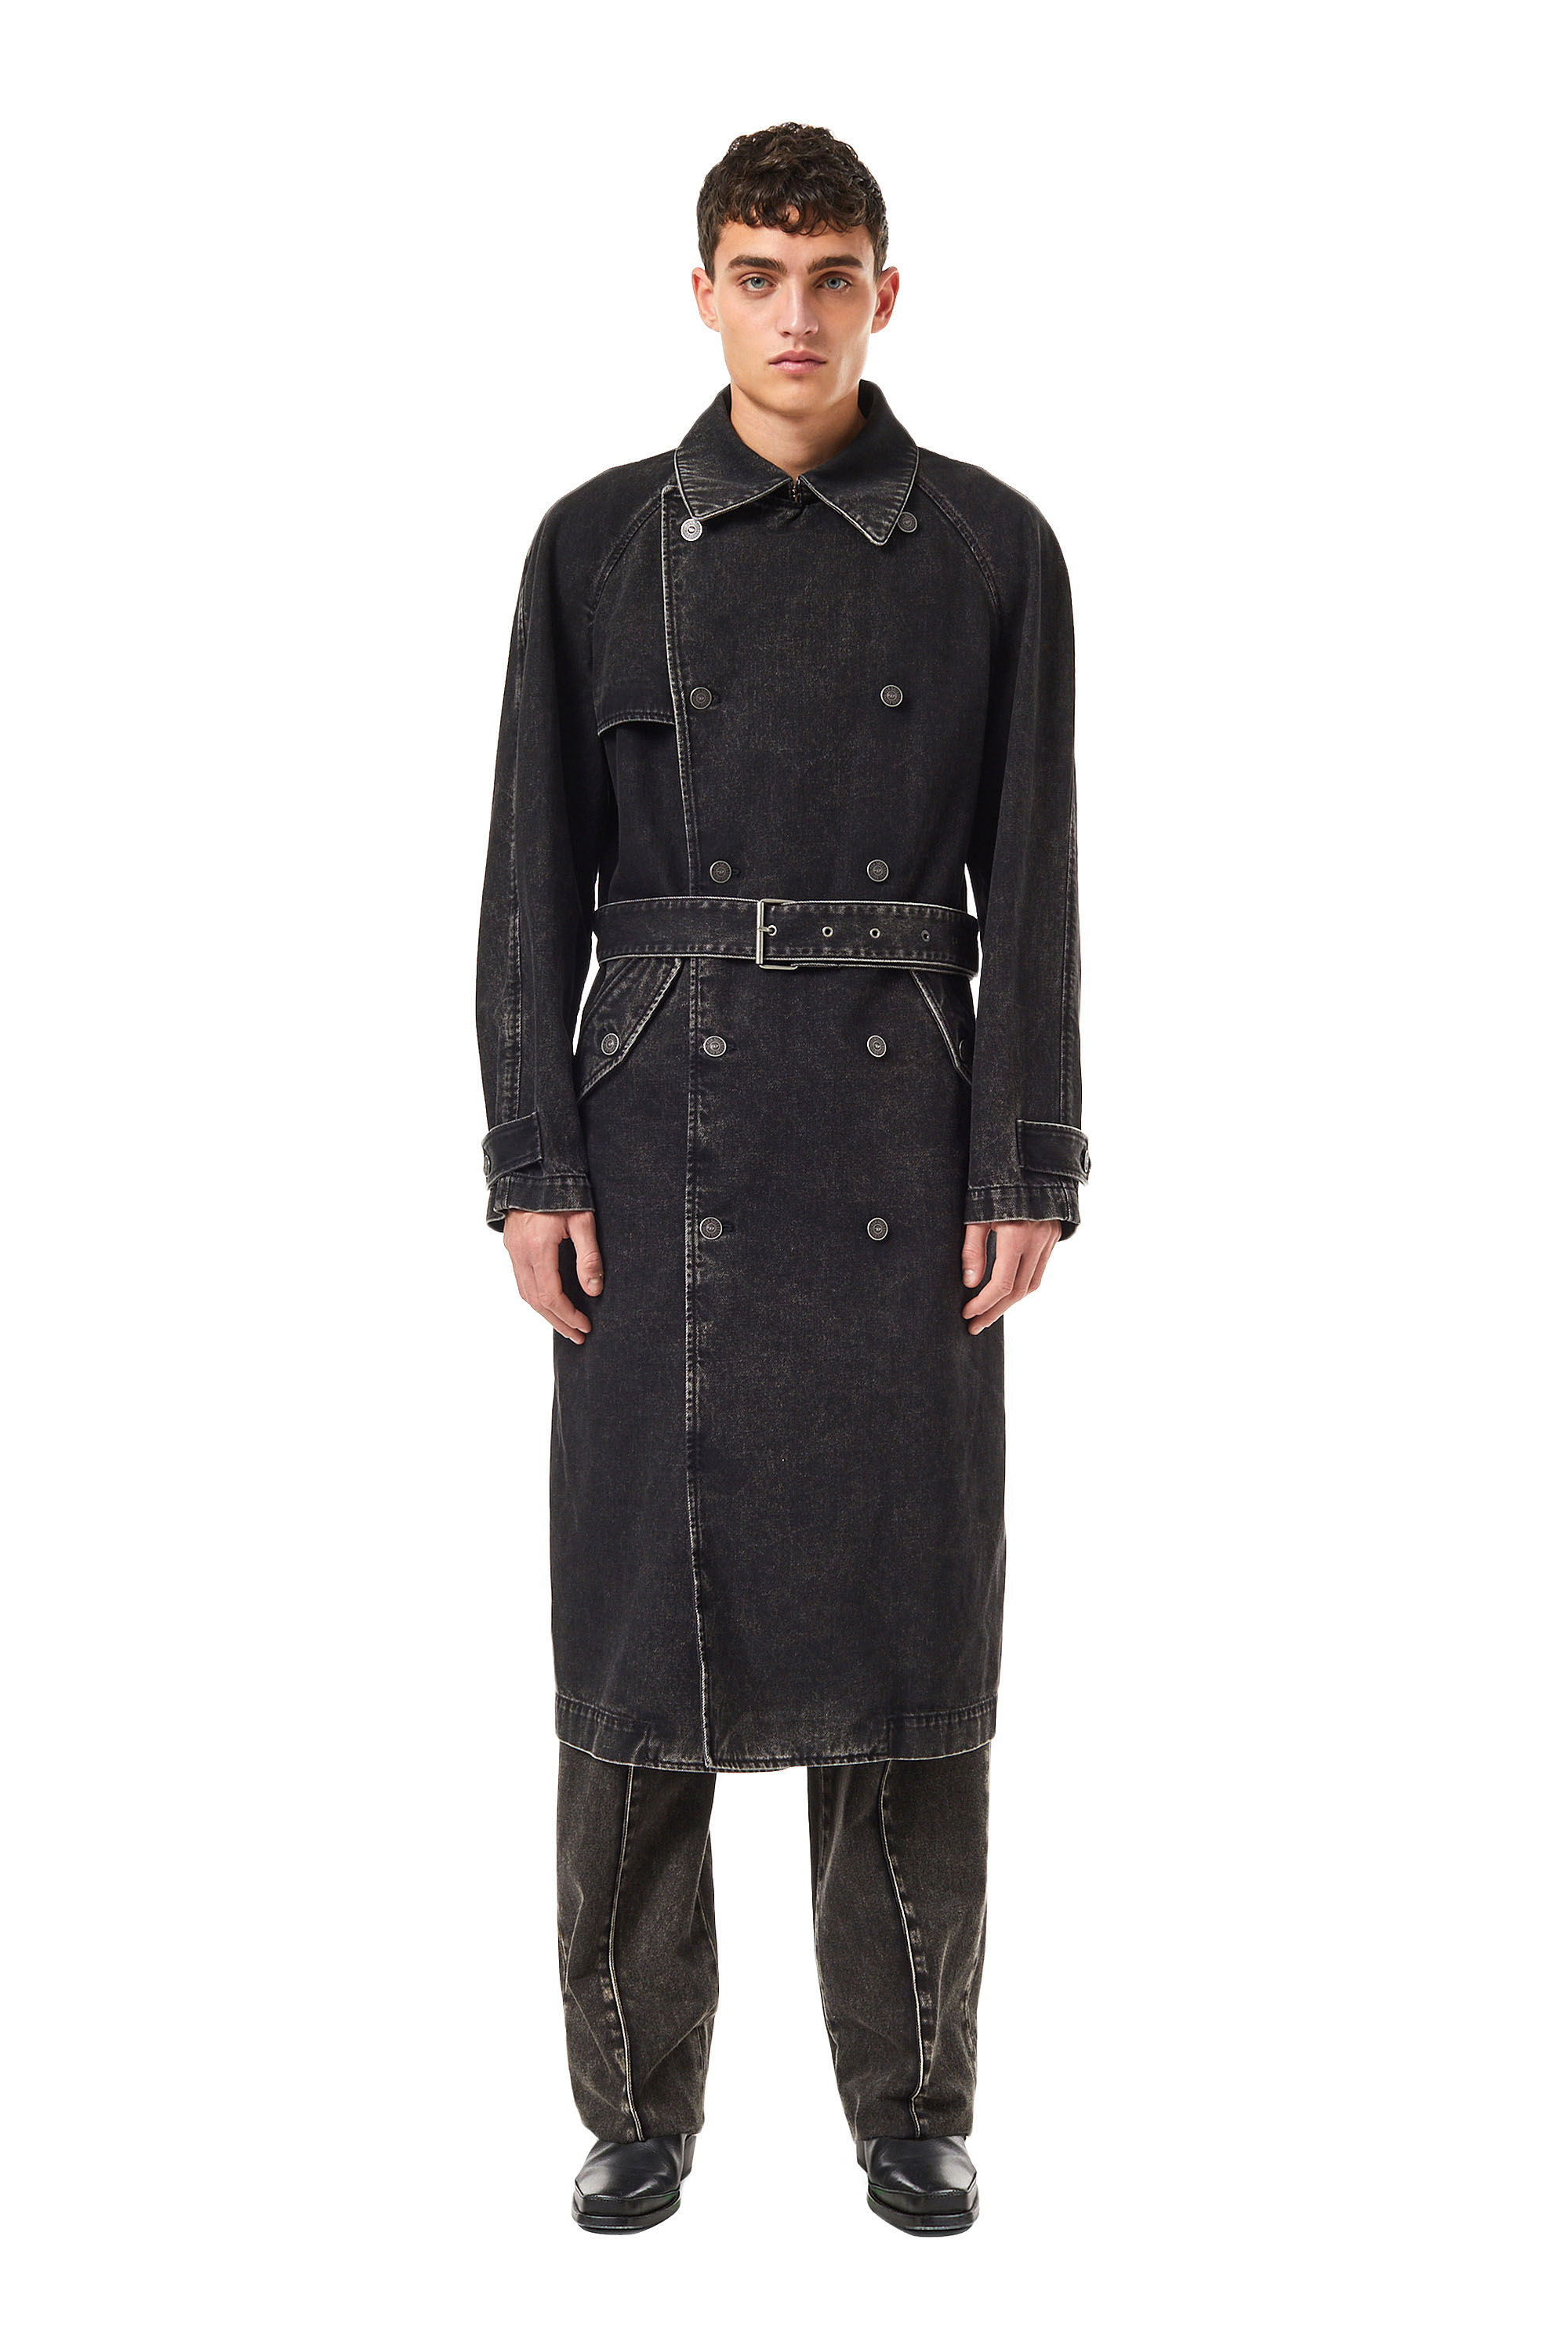 D-DELIRIOUS DOUBLE BREASTED TRENCH COAT, Negro/Gris oscuro